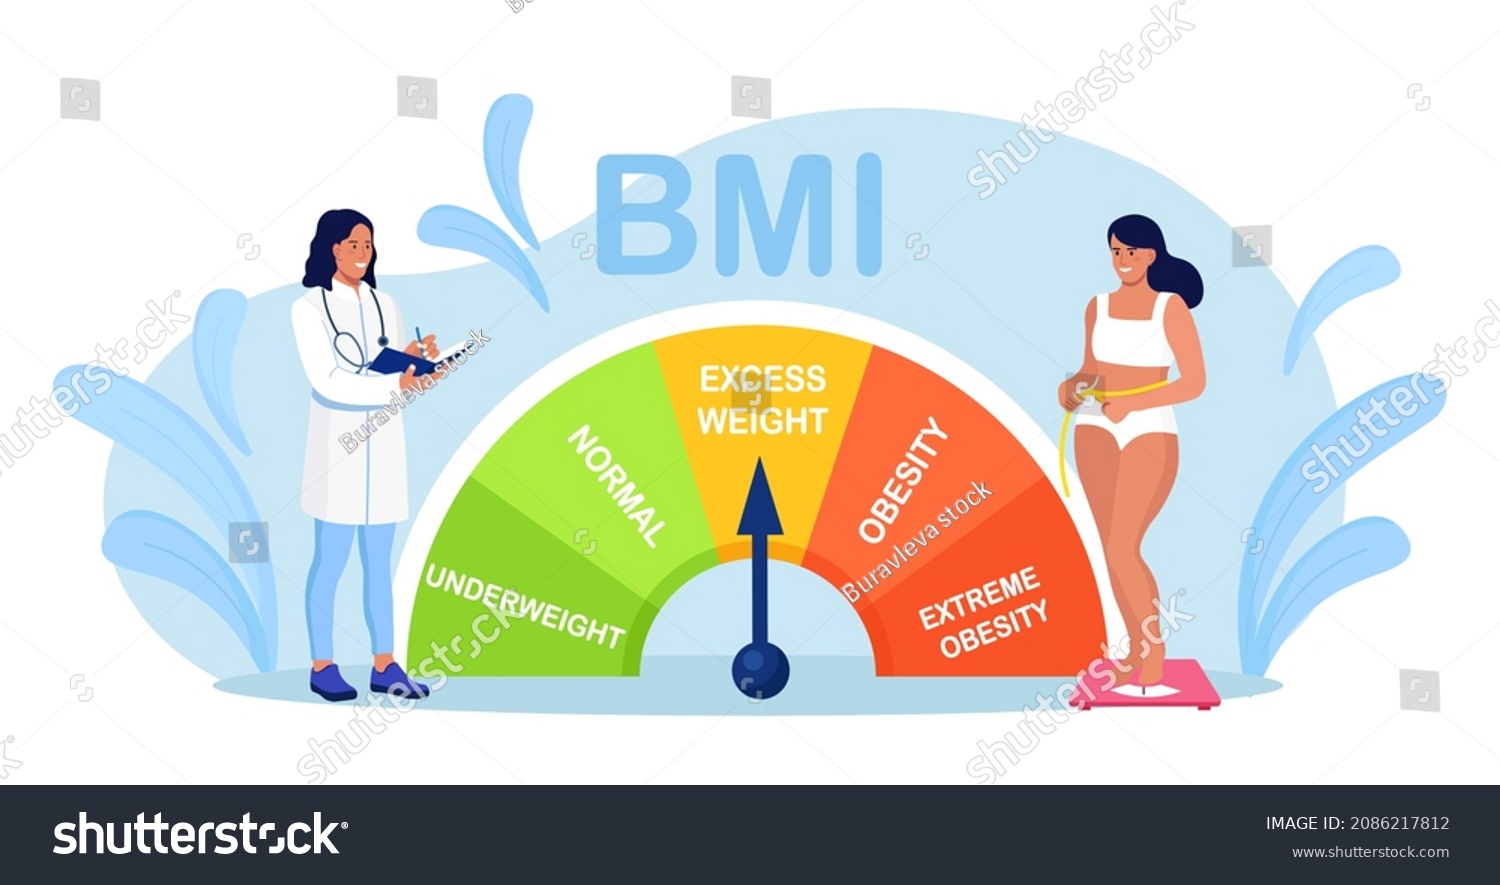 SVG of Body mass index control. Pretty young woman on diet trying to control body weight with BMI. Girl stands on scale. Healthy fat measurement method. Obesity, underweight and extremely obese chart scales svg